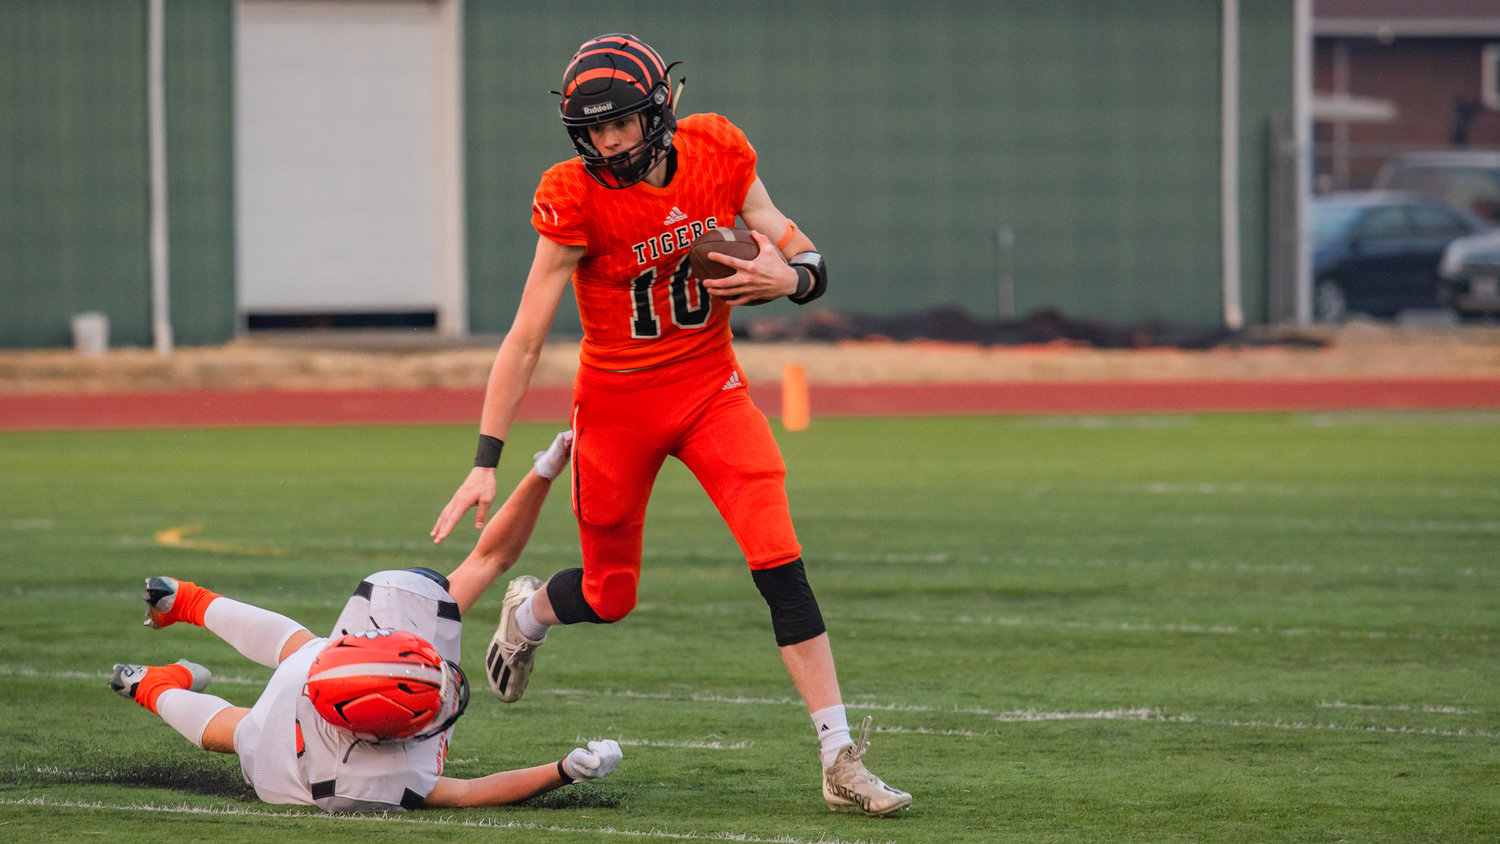 Landen Jenkins, quarterback for the Centralia Tigers, successfully avoids a tackle by a Battle Ground Tigers defender in a home game Friday night.